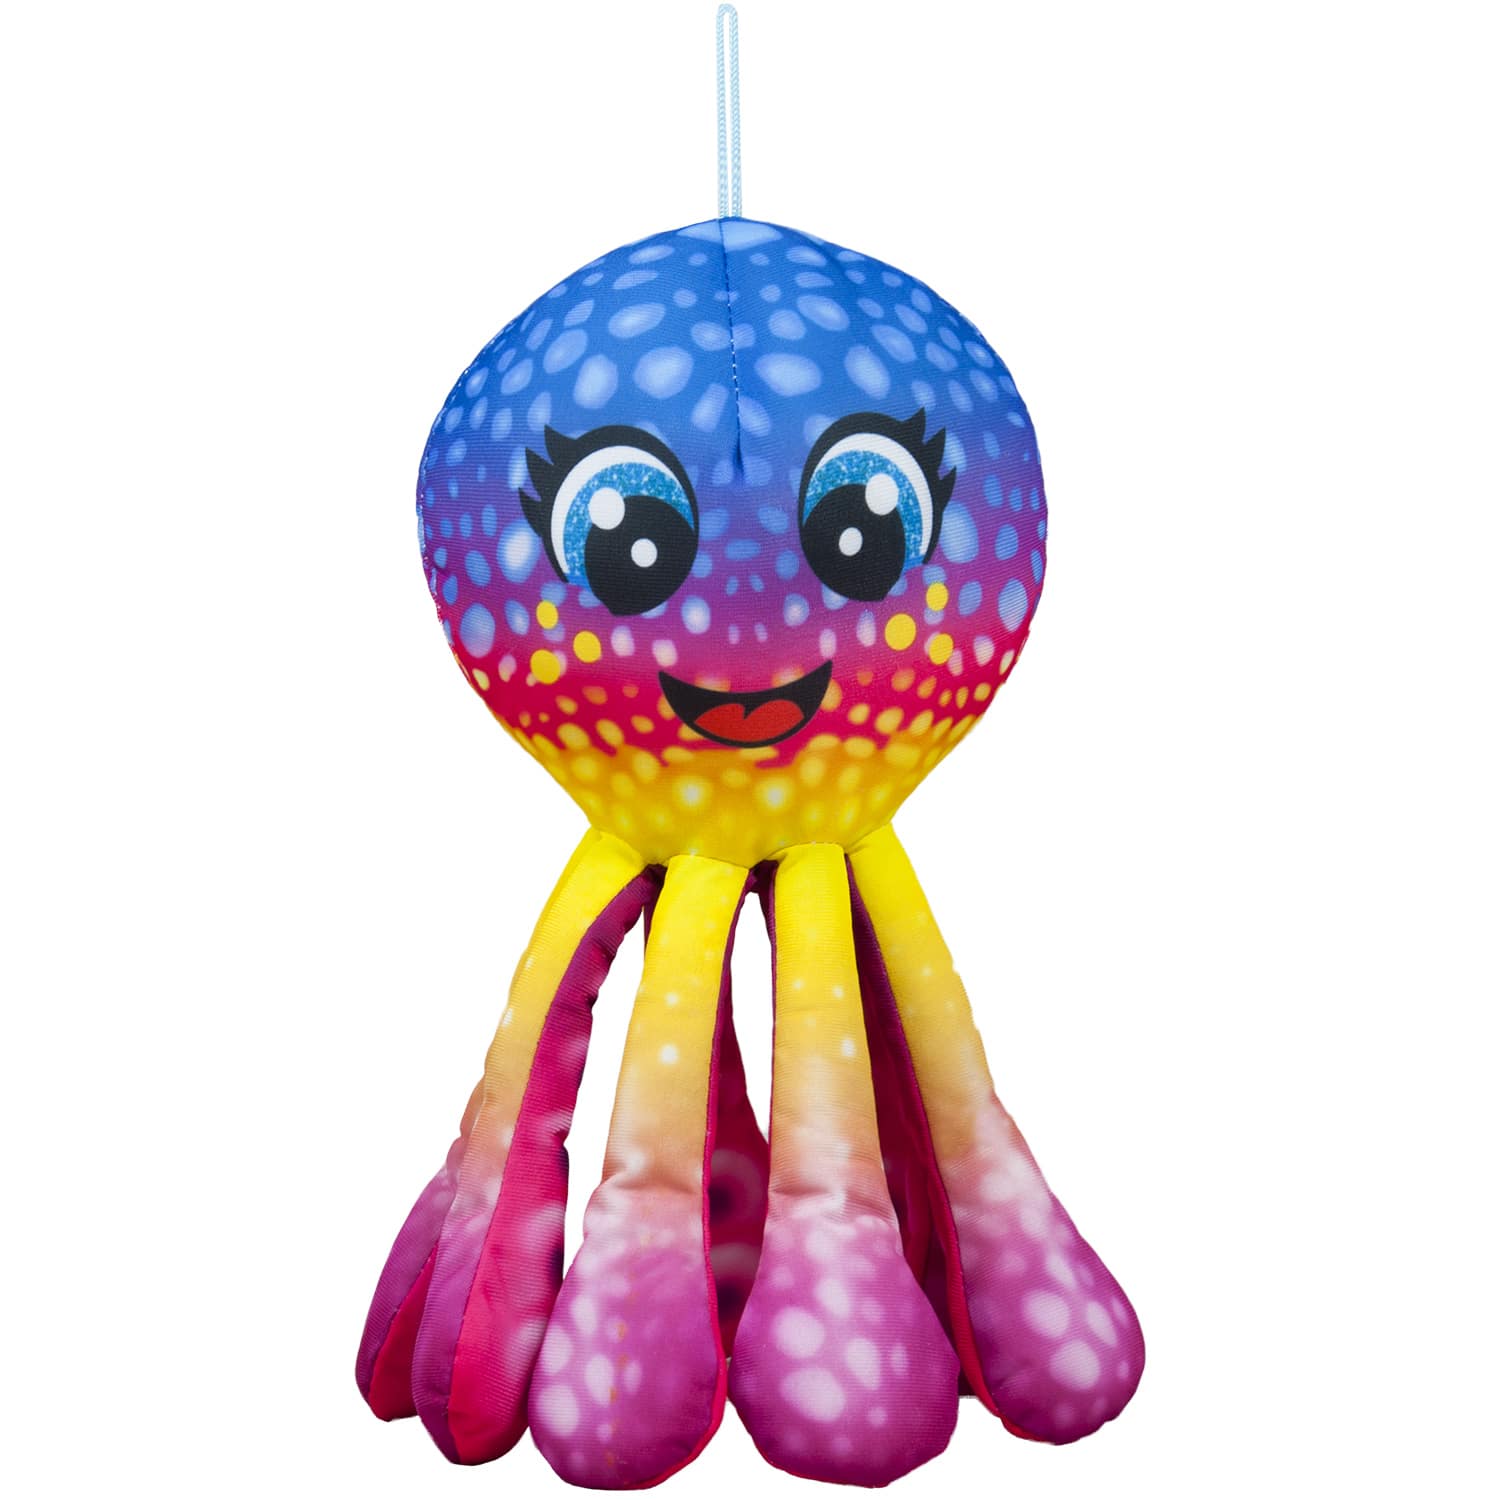 Colored octopus